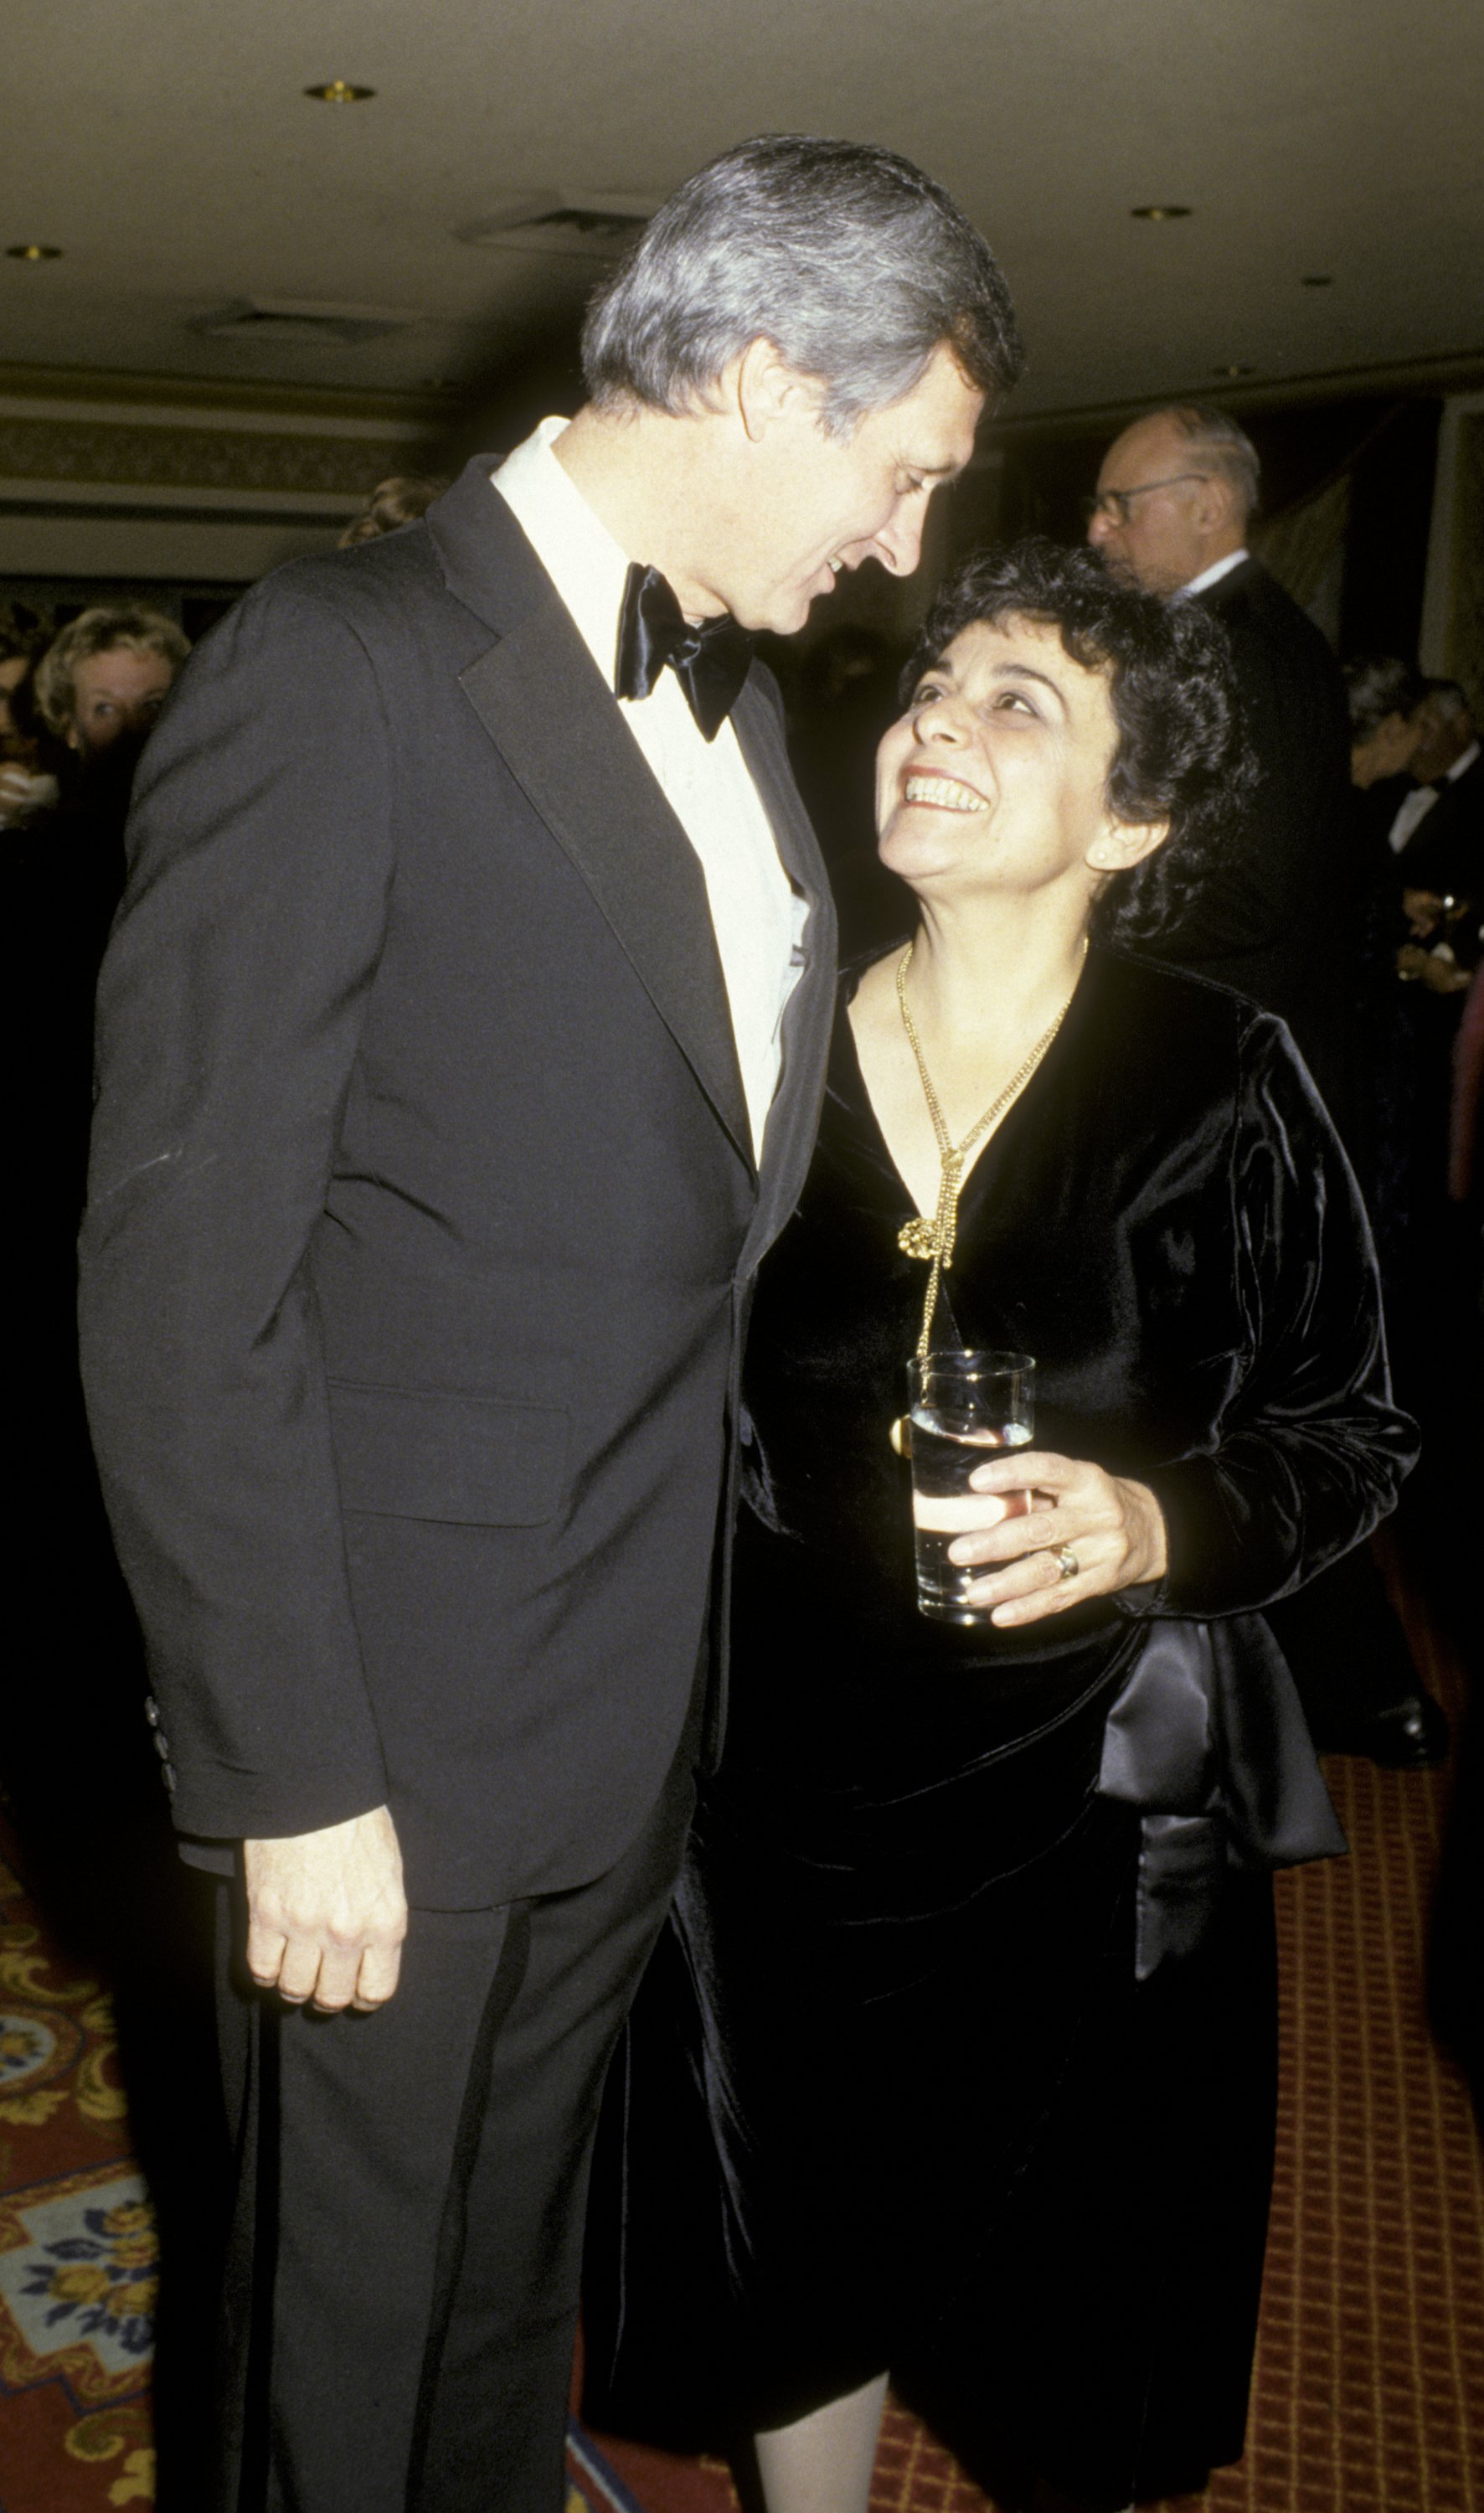 Alan Alda and wife Arlene Weiss attend the First Annual Guild Hall Awards on September 23, 1986 at the St. Regis Hotel in New York City | Source: Getty Images